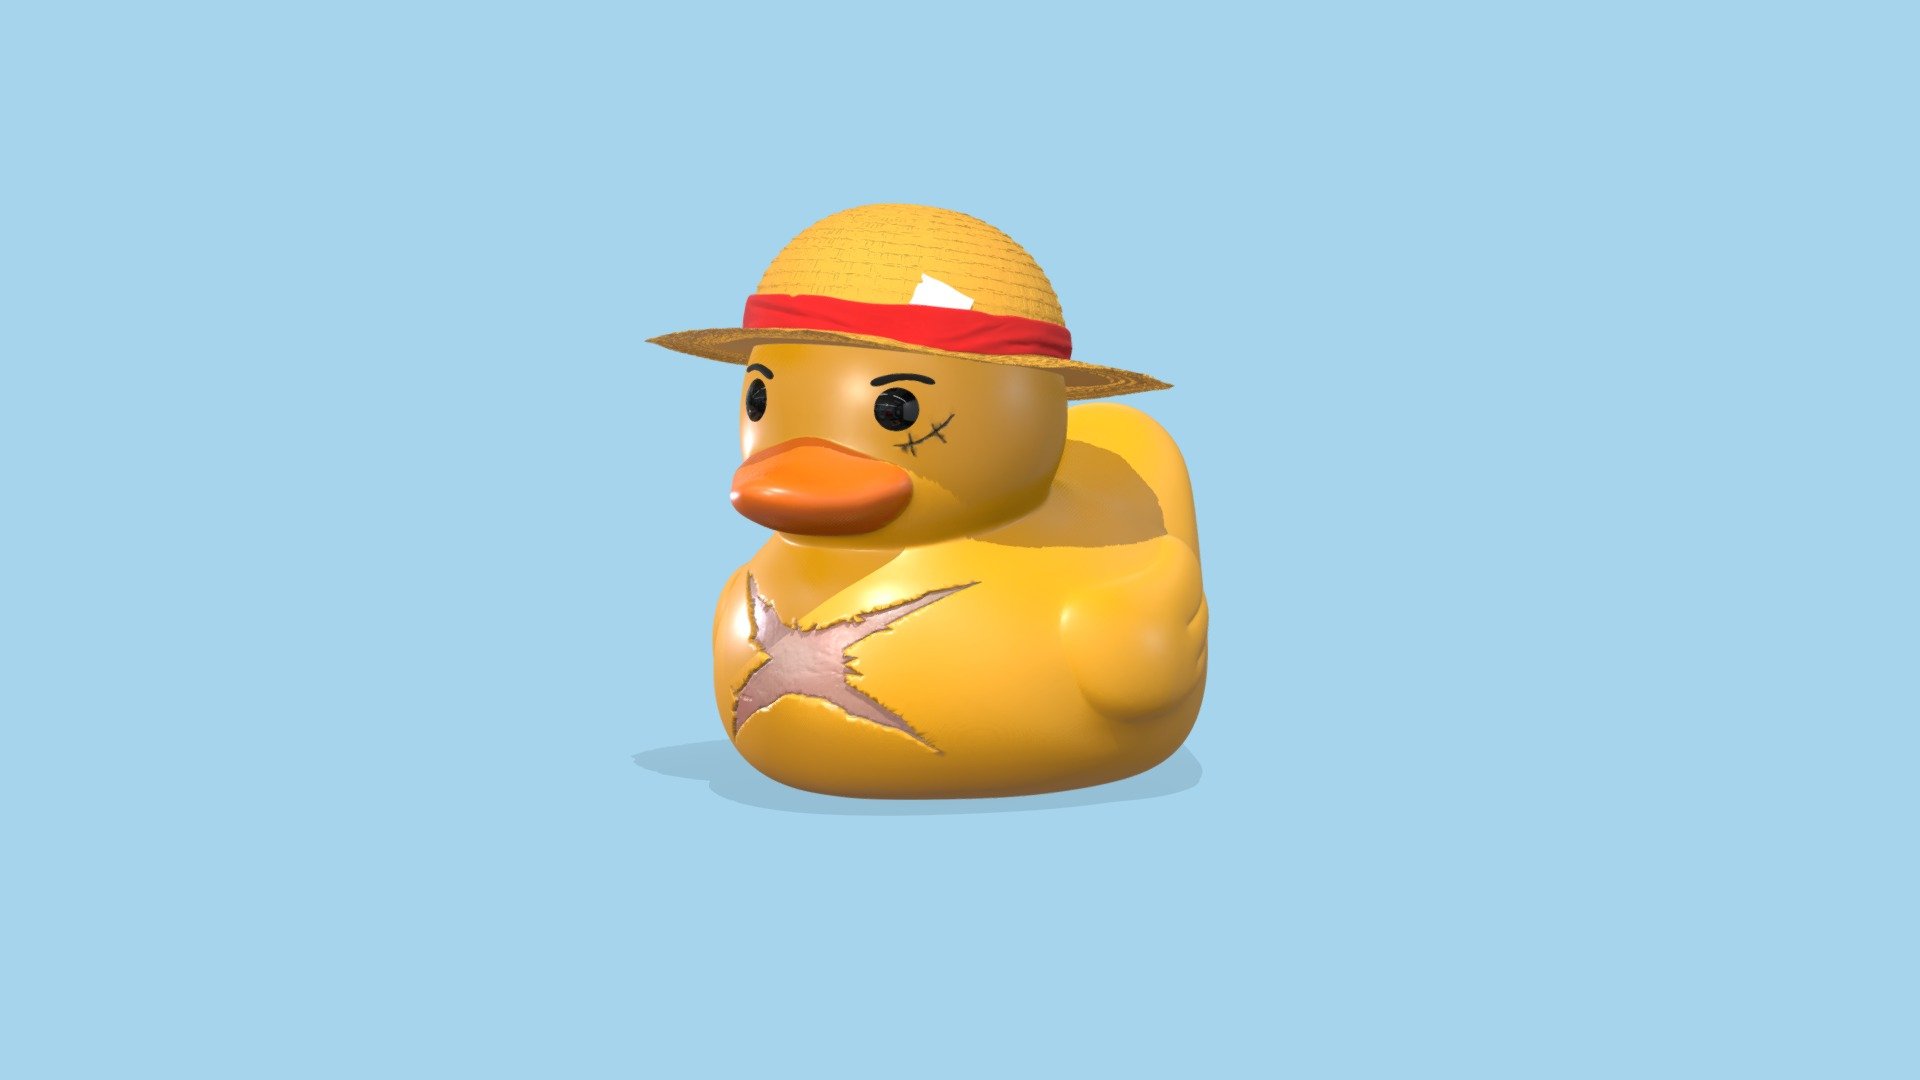 I dont have time to explain but I needs Gifs and Pictures of anime ducks :  r/anime